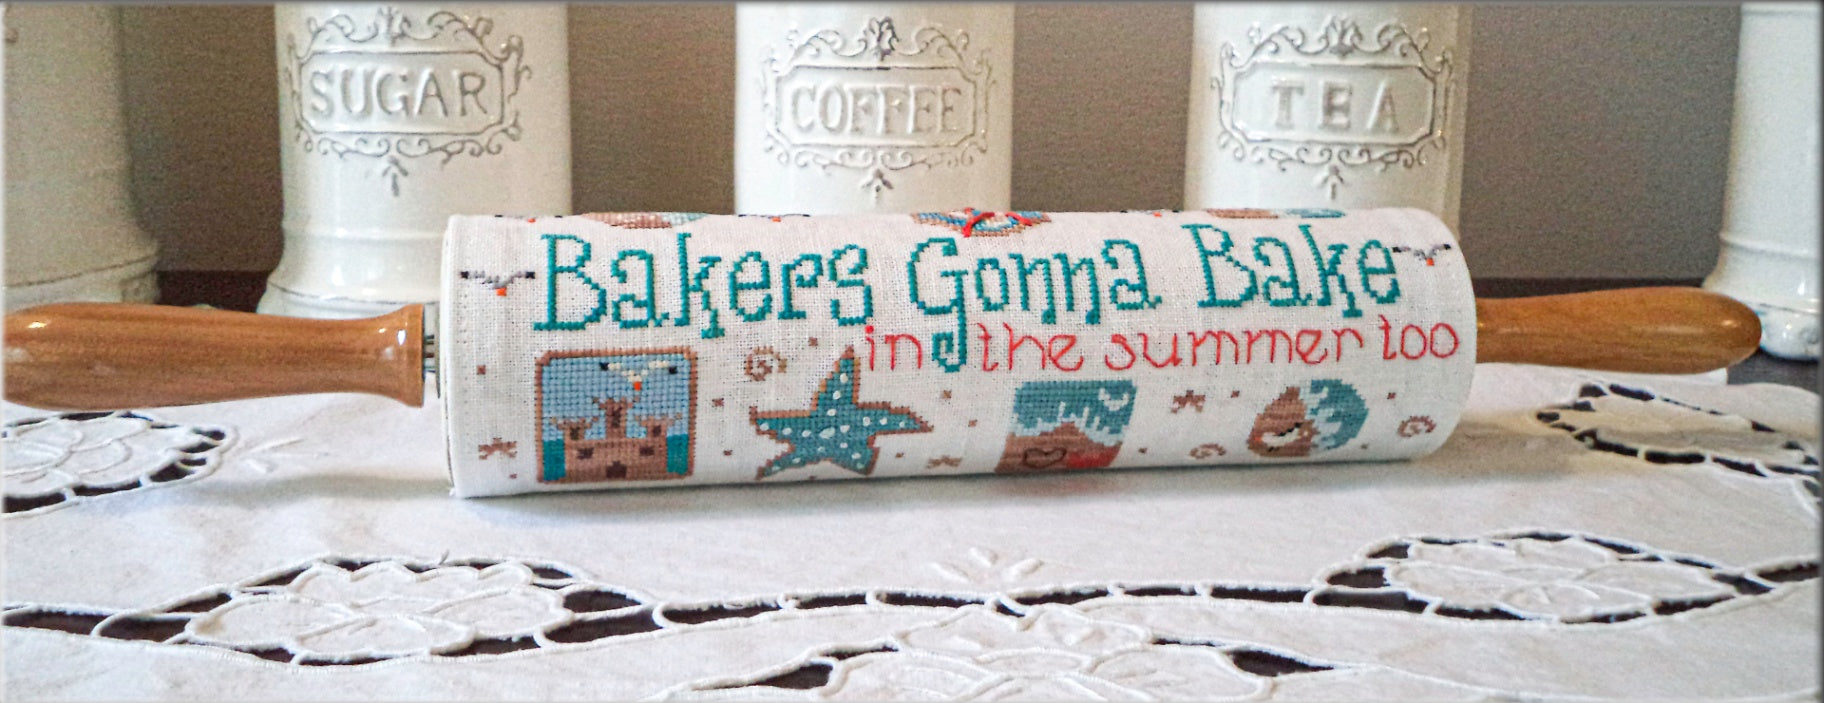 Bakers Gonna Bake.....in the summer too!